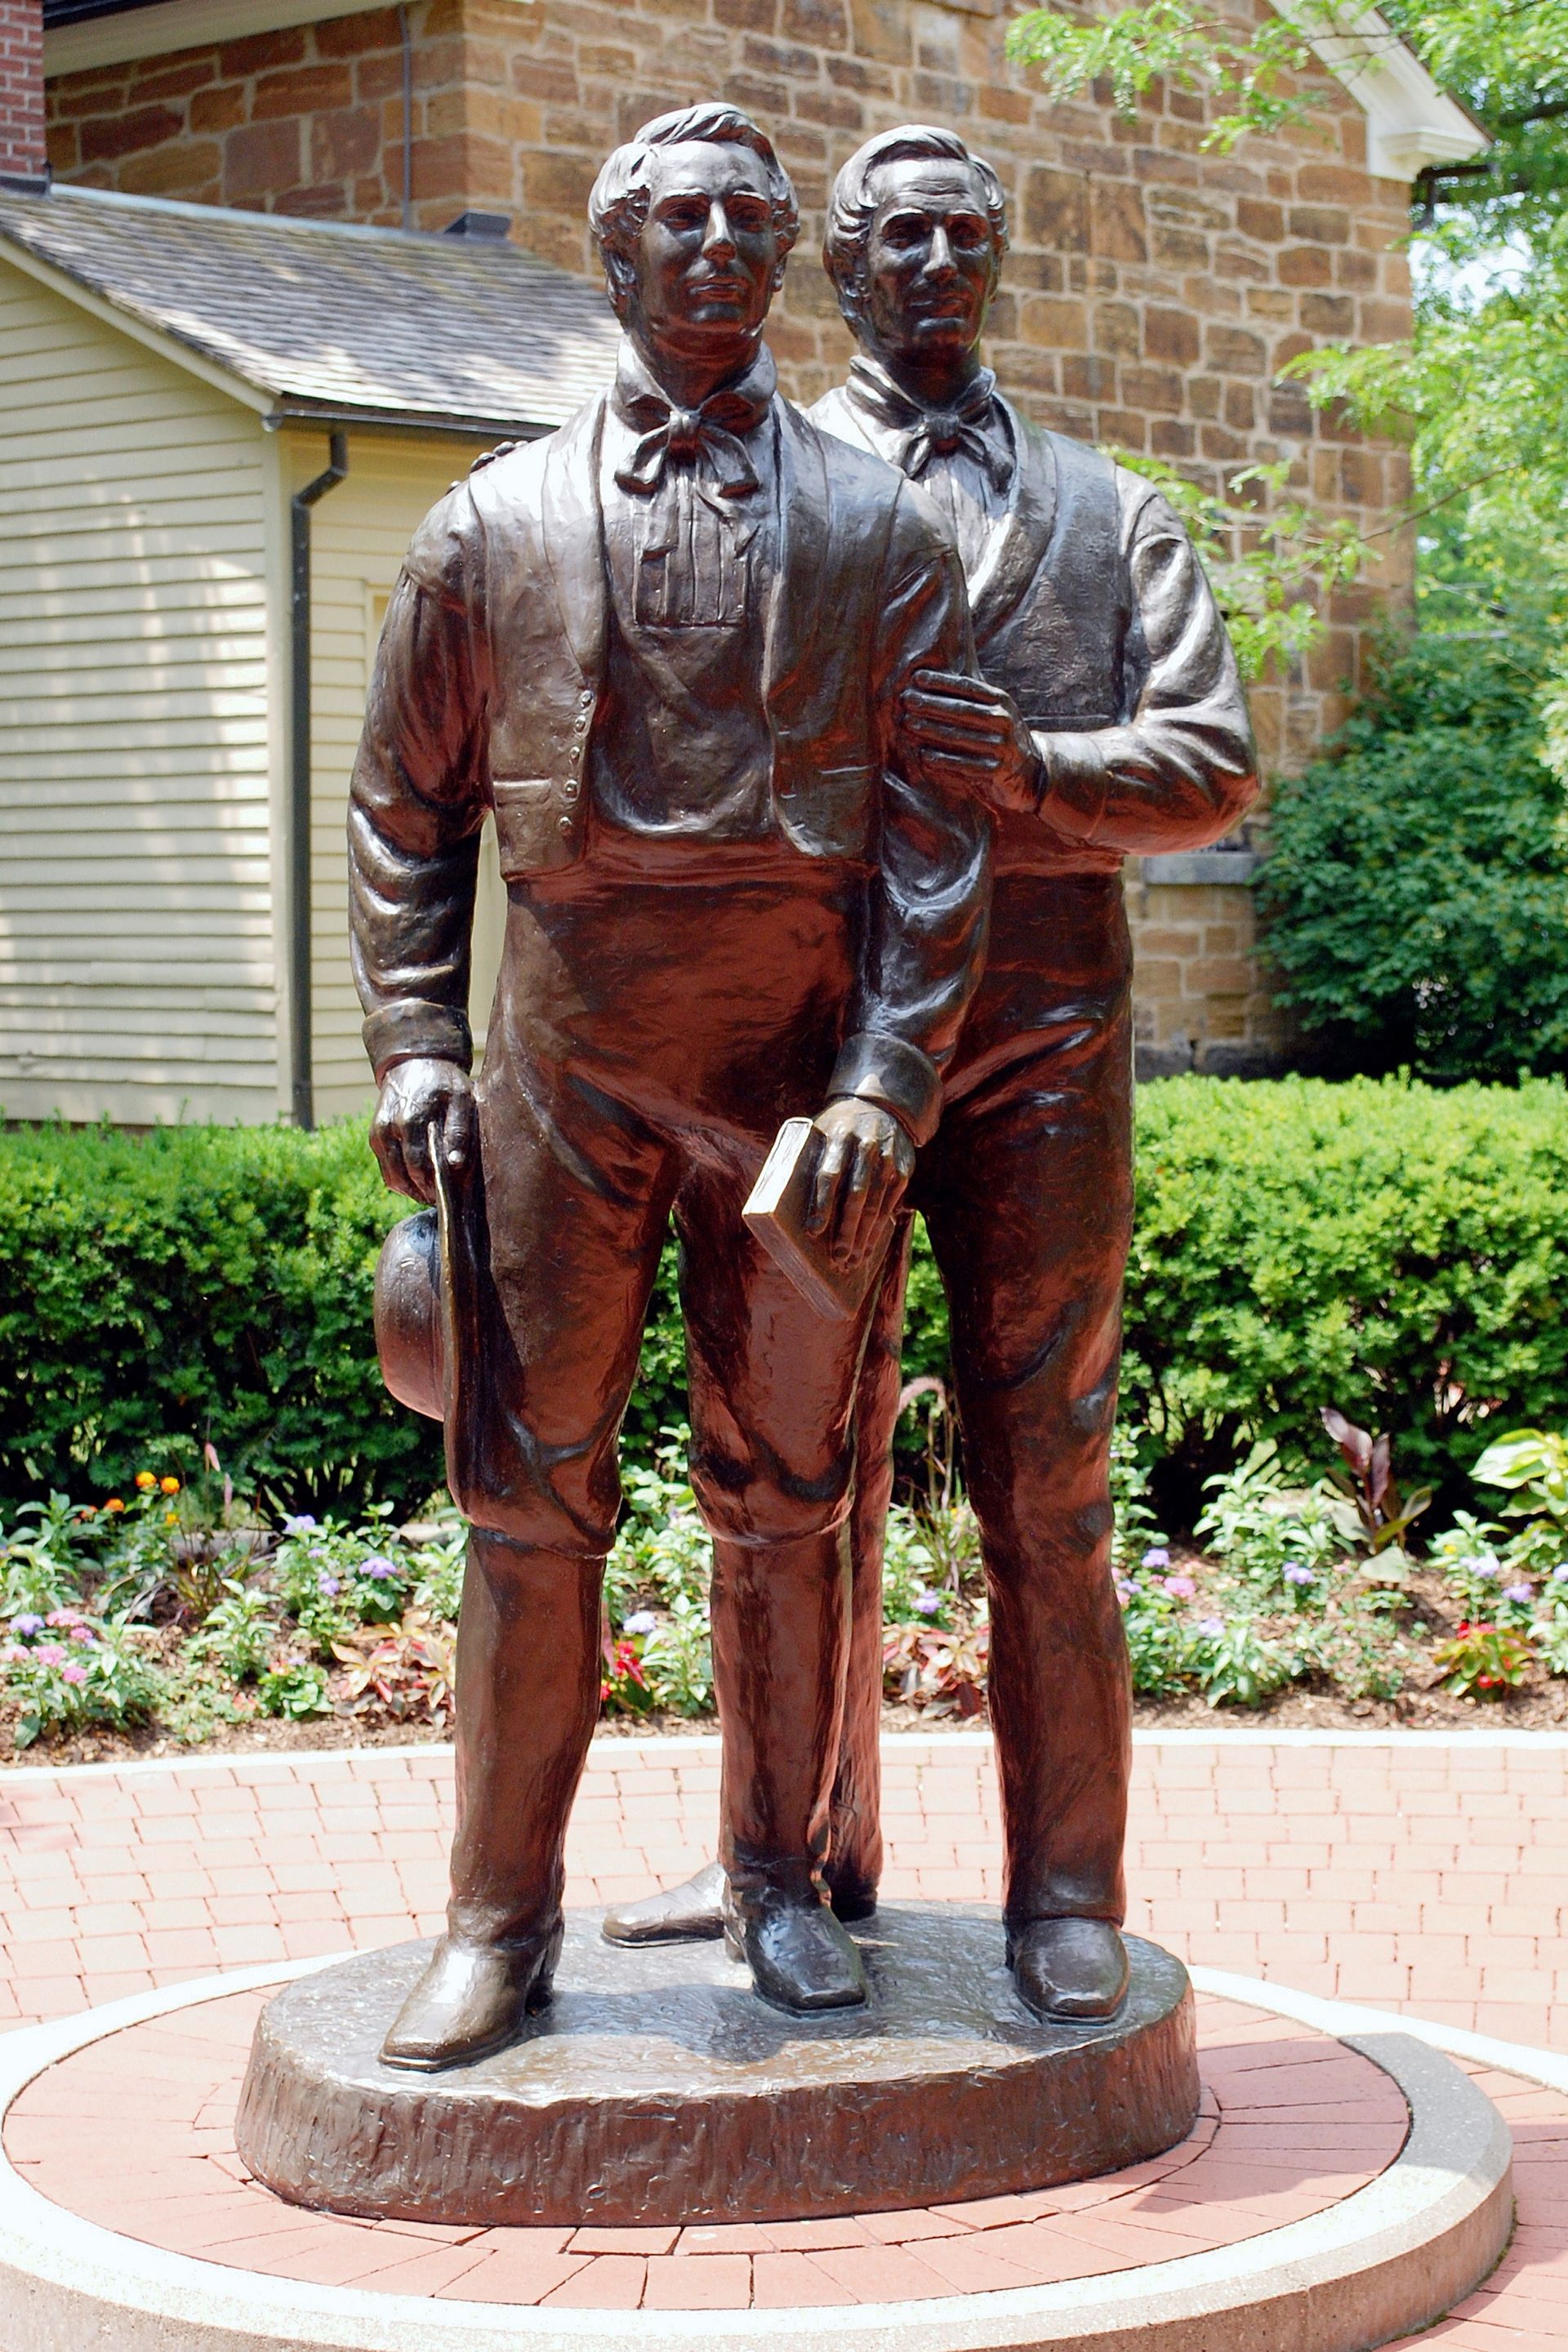 A statue of Joseph and Hyrum Smith by Carthage Jail in Illinois.